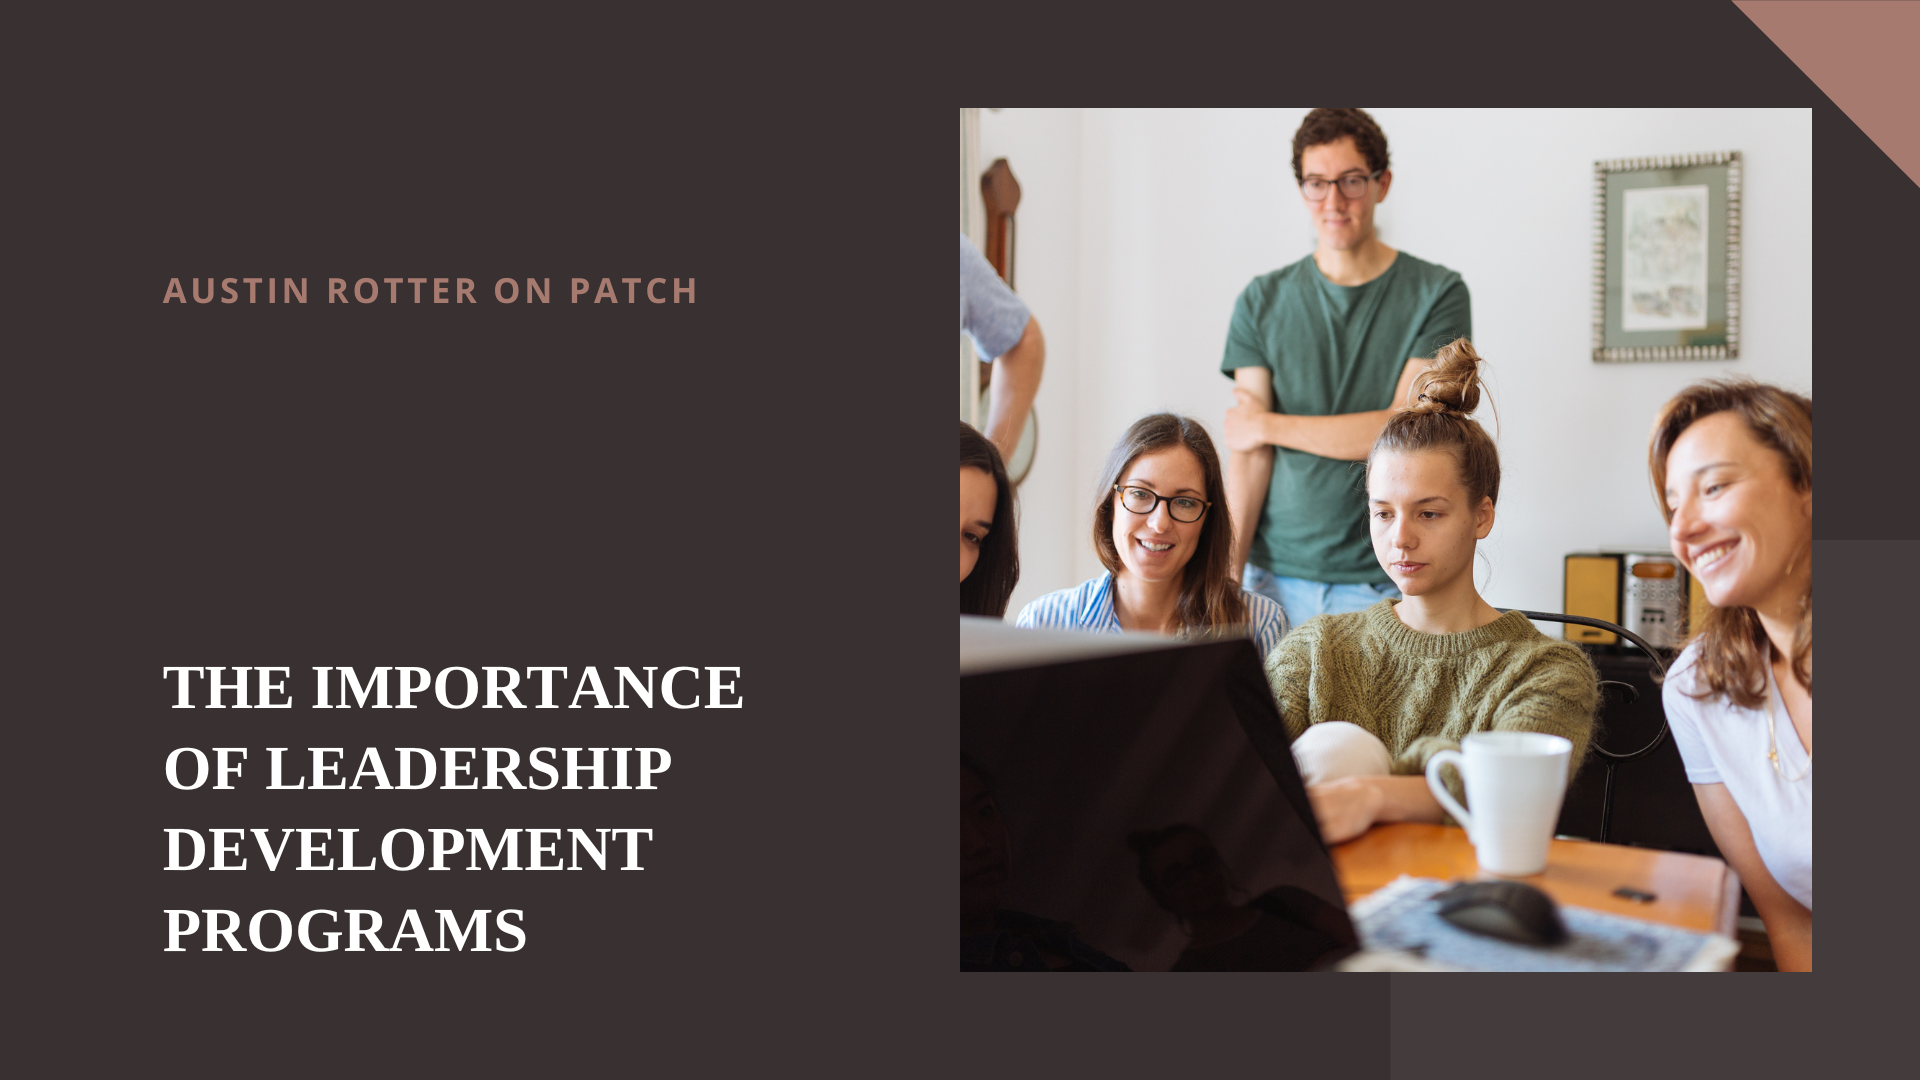 AUSTIN ROTTER ON PATCH

THE IMPORTANCE
OF LEADERSHIP
DEVELOPMENT
PROGRAMS